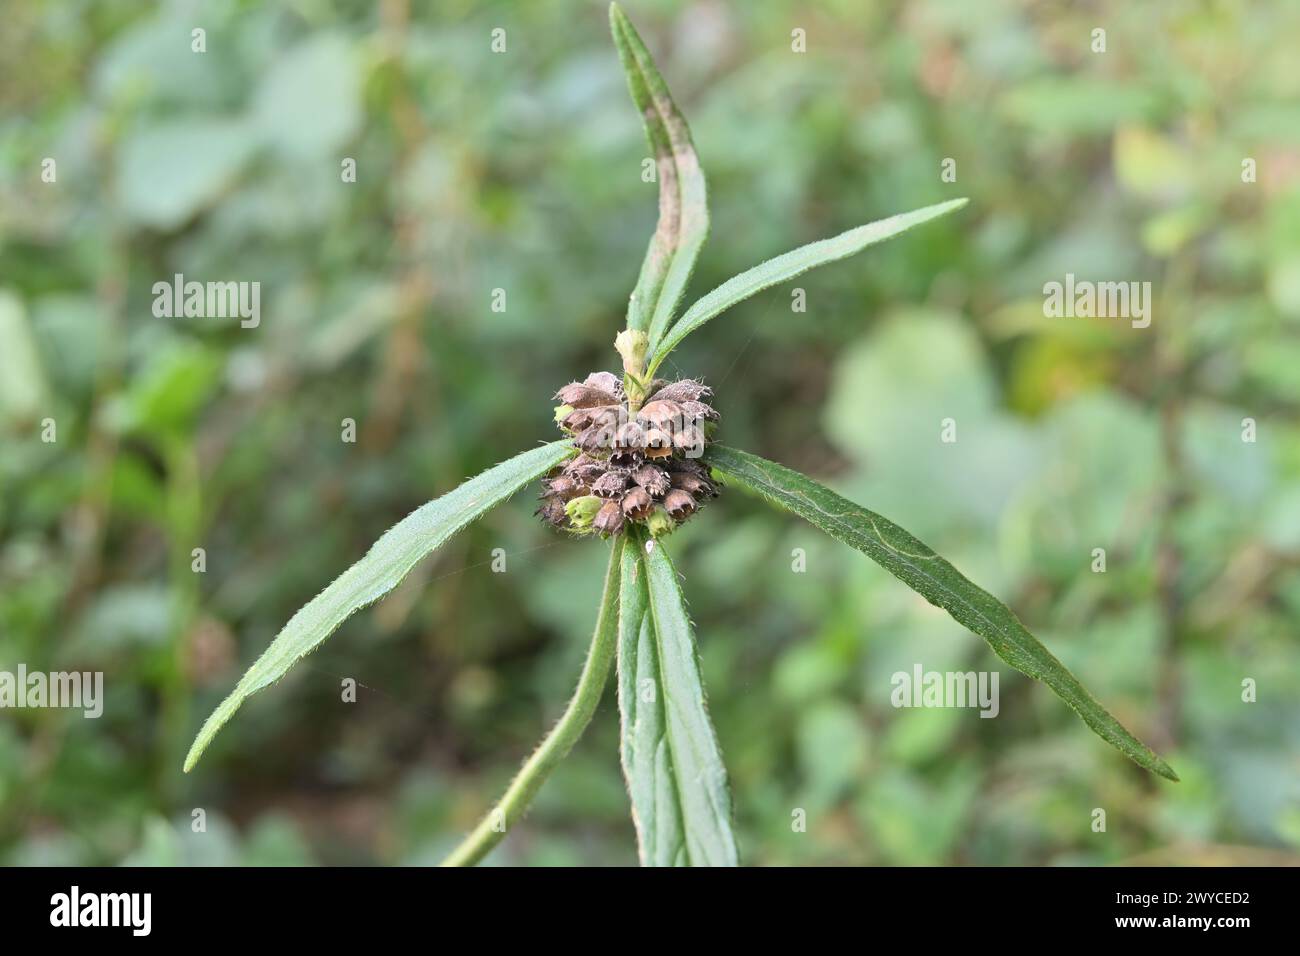 View of a dry seed cluster of a Ceylon slitwort plant (Leucas zeylanica) in a lawn area Stock Photo